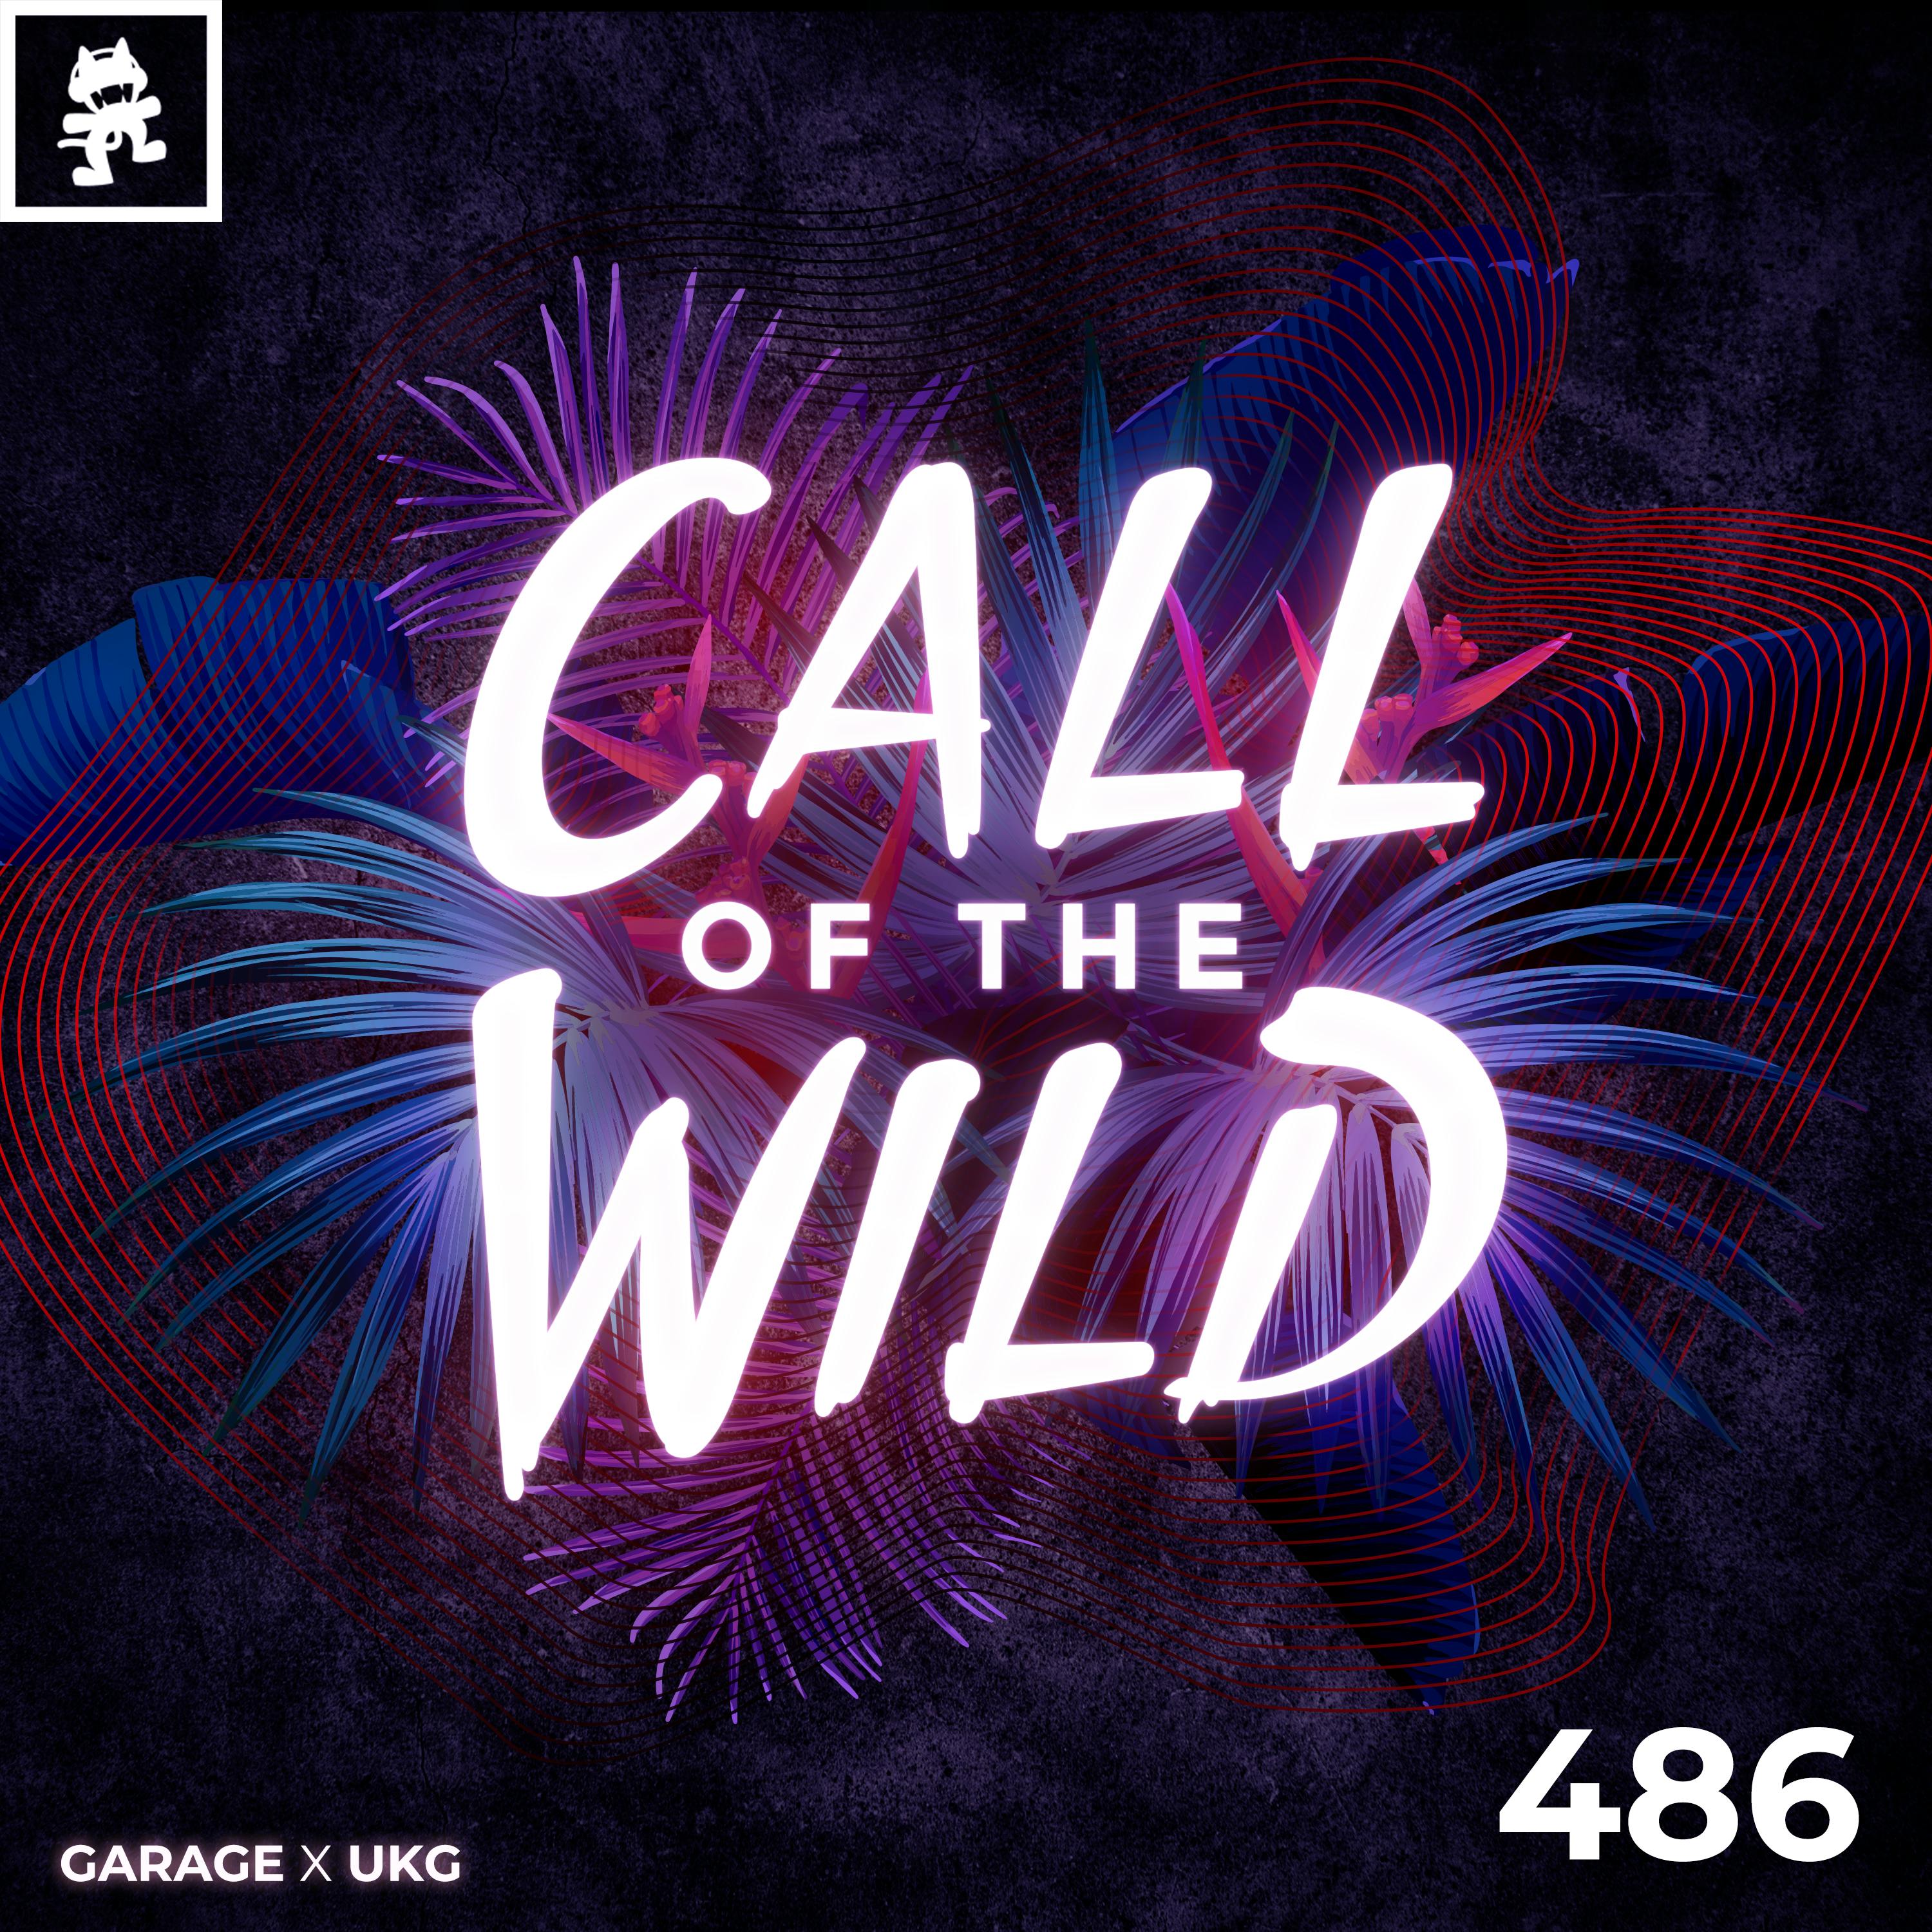 486 - Monstercat Call of the Wild: Garage x UKG (Mixed by Darby)